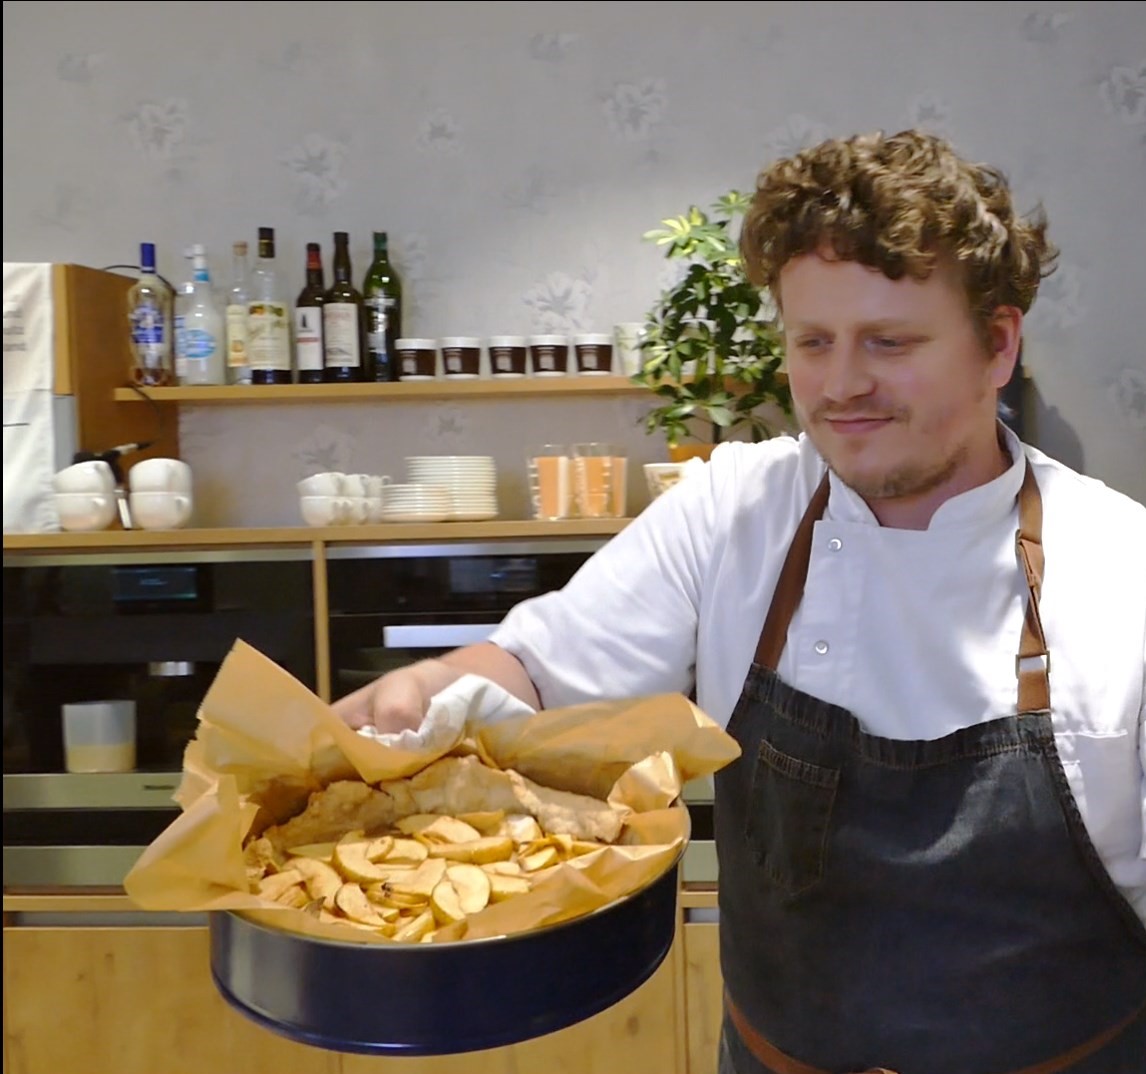 Chef Lutz holds a finished apple pie up to the camera. He is wearing a white T-shirt with a dark blue apron and is standing in a modern kitchen.